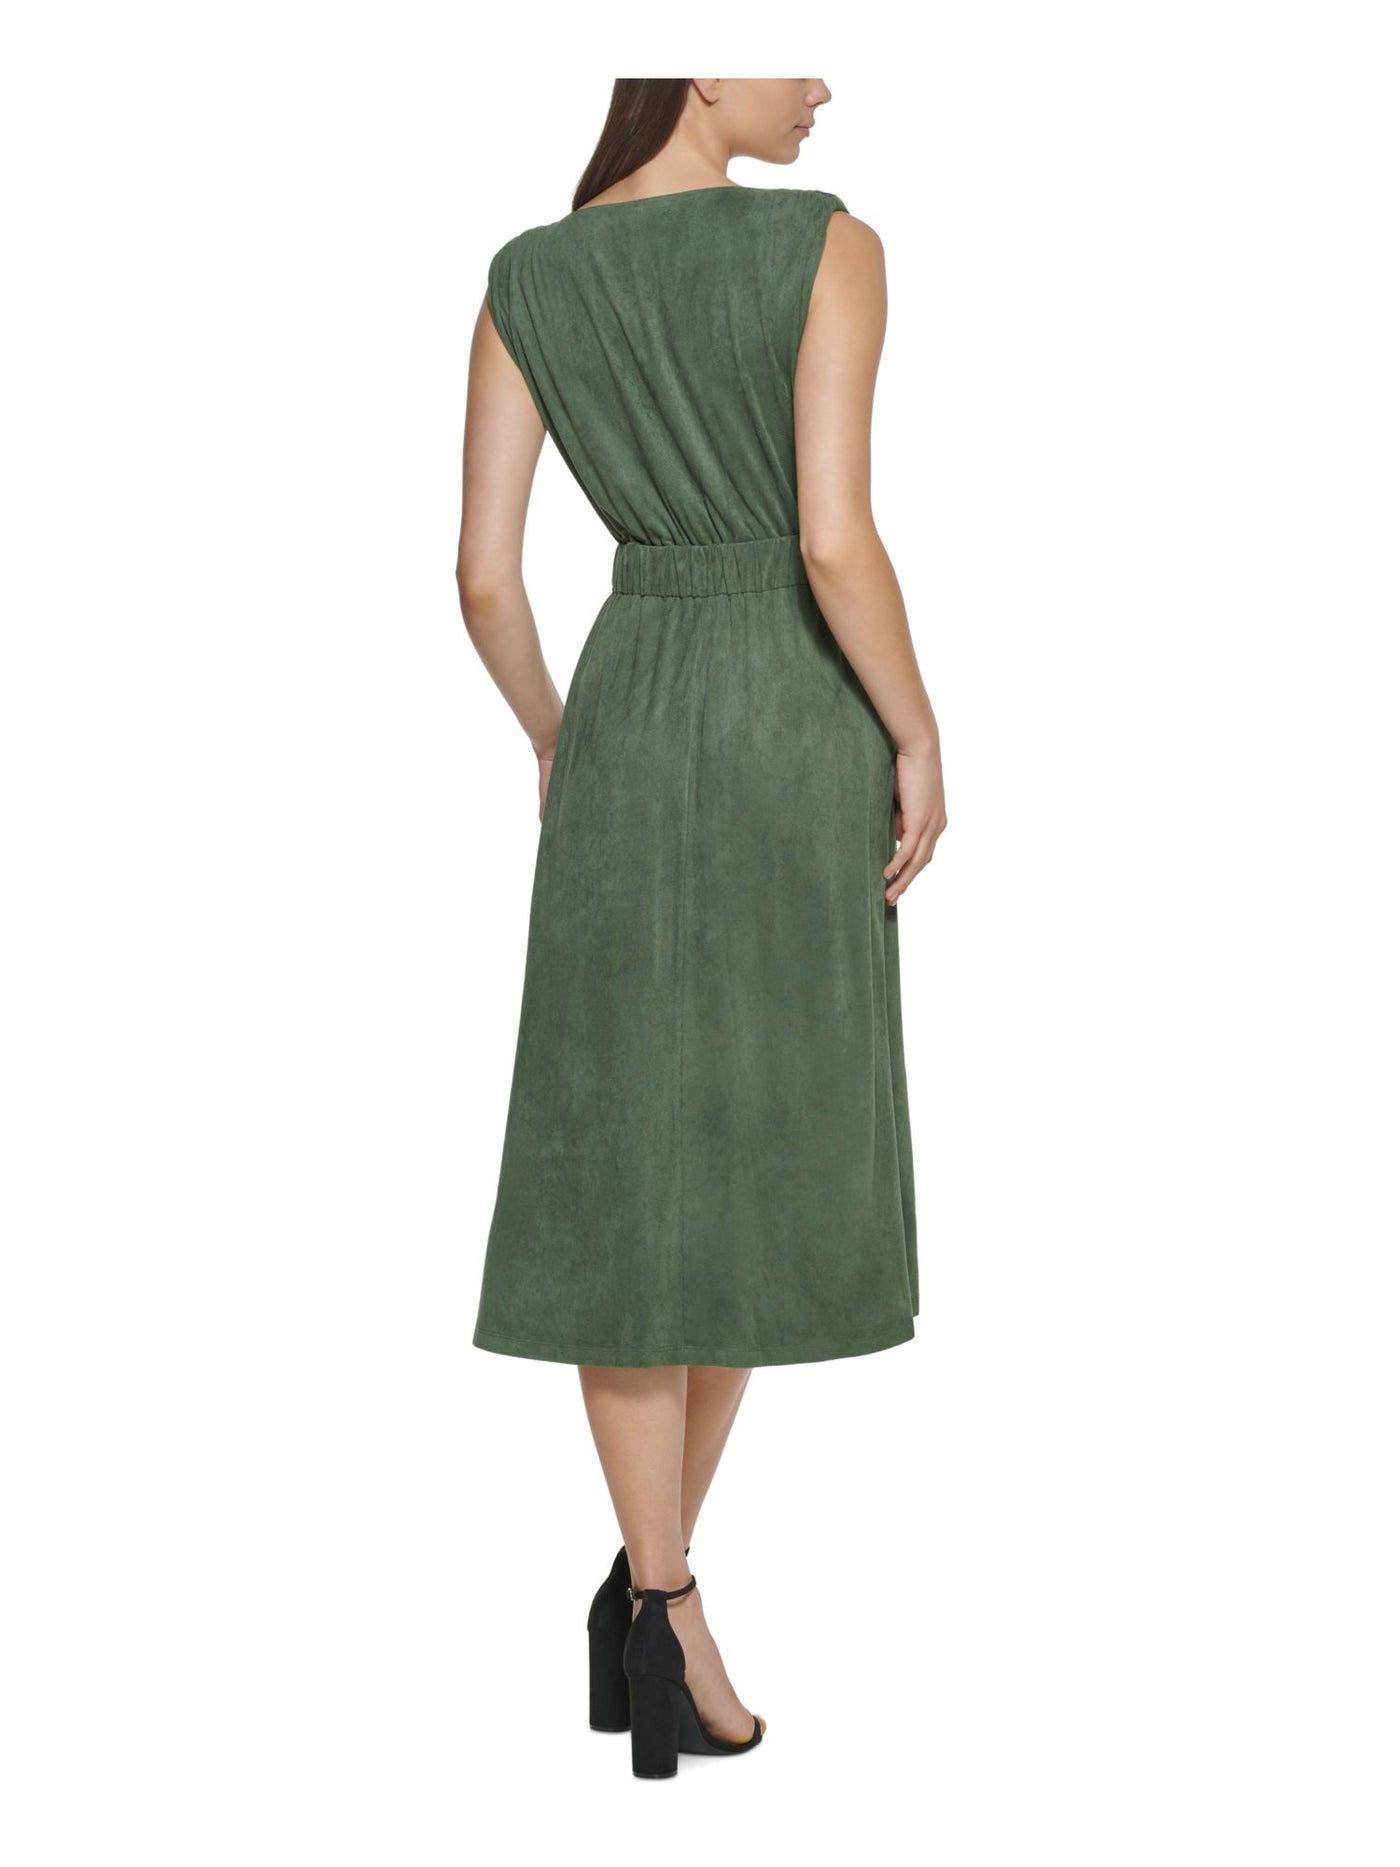 KENSIE Womens Green Stretch Faux Suede Ruched Belted Pocketed Pullover Sleeveless V Neck Midi Wear To Work Sheath Dress XL